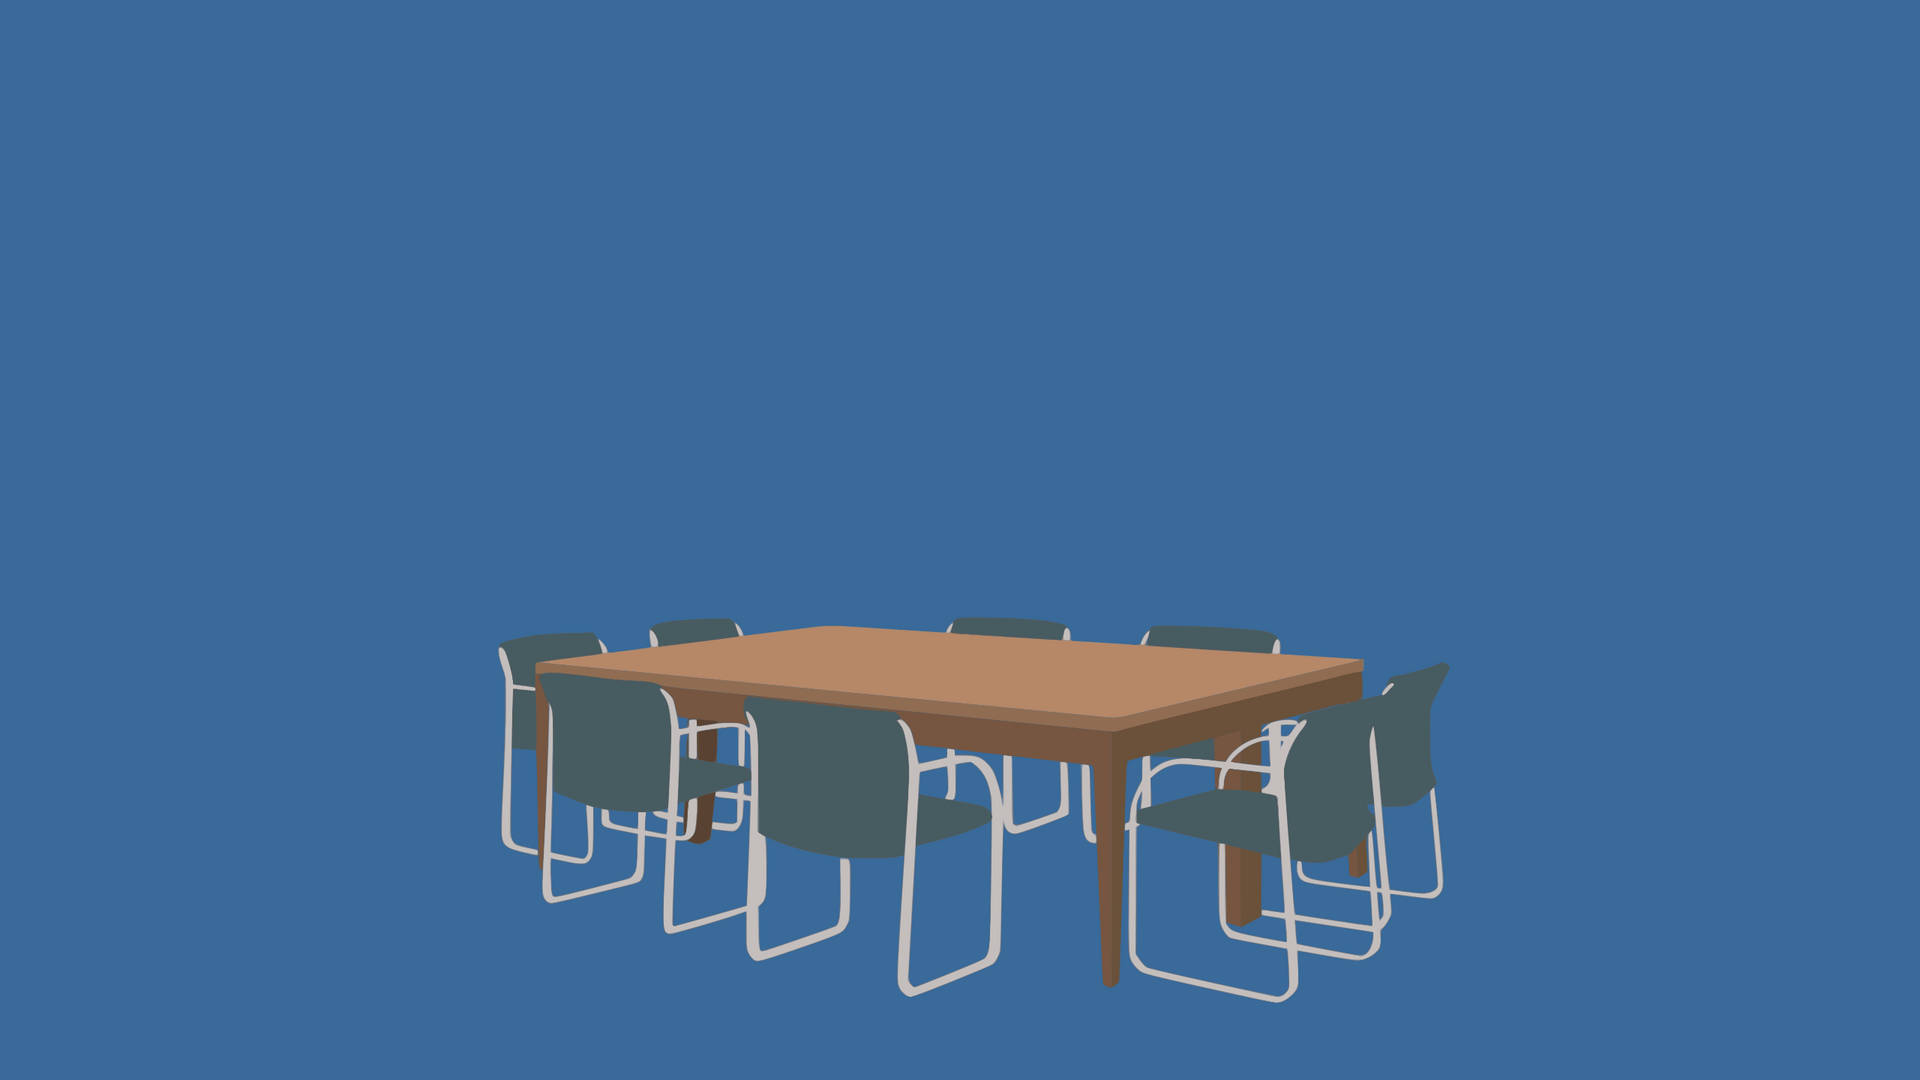 Community Study Room Table Background